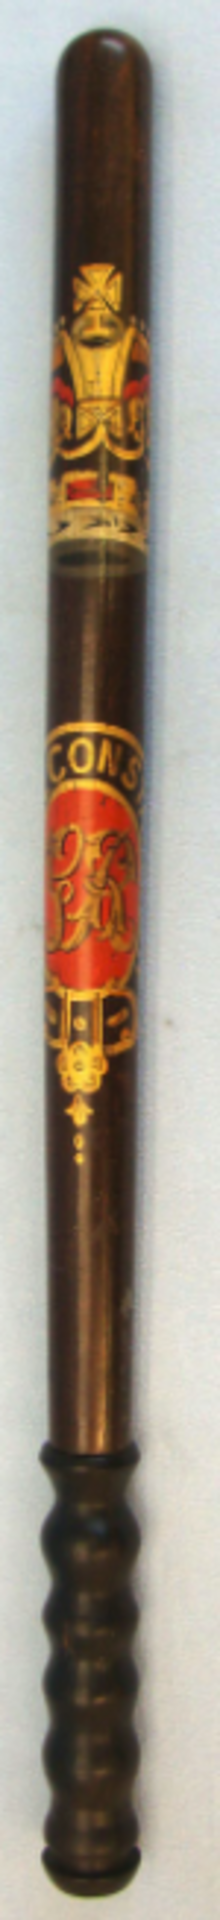 A Long Two Piece Police Truncheon, Hand Decorated, Kings Crown, To Fifeshire Constabulary.   Fife